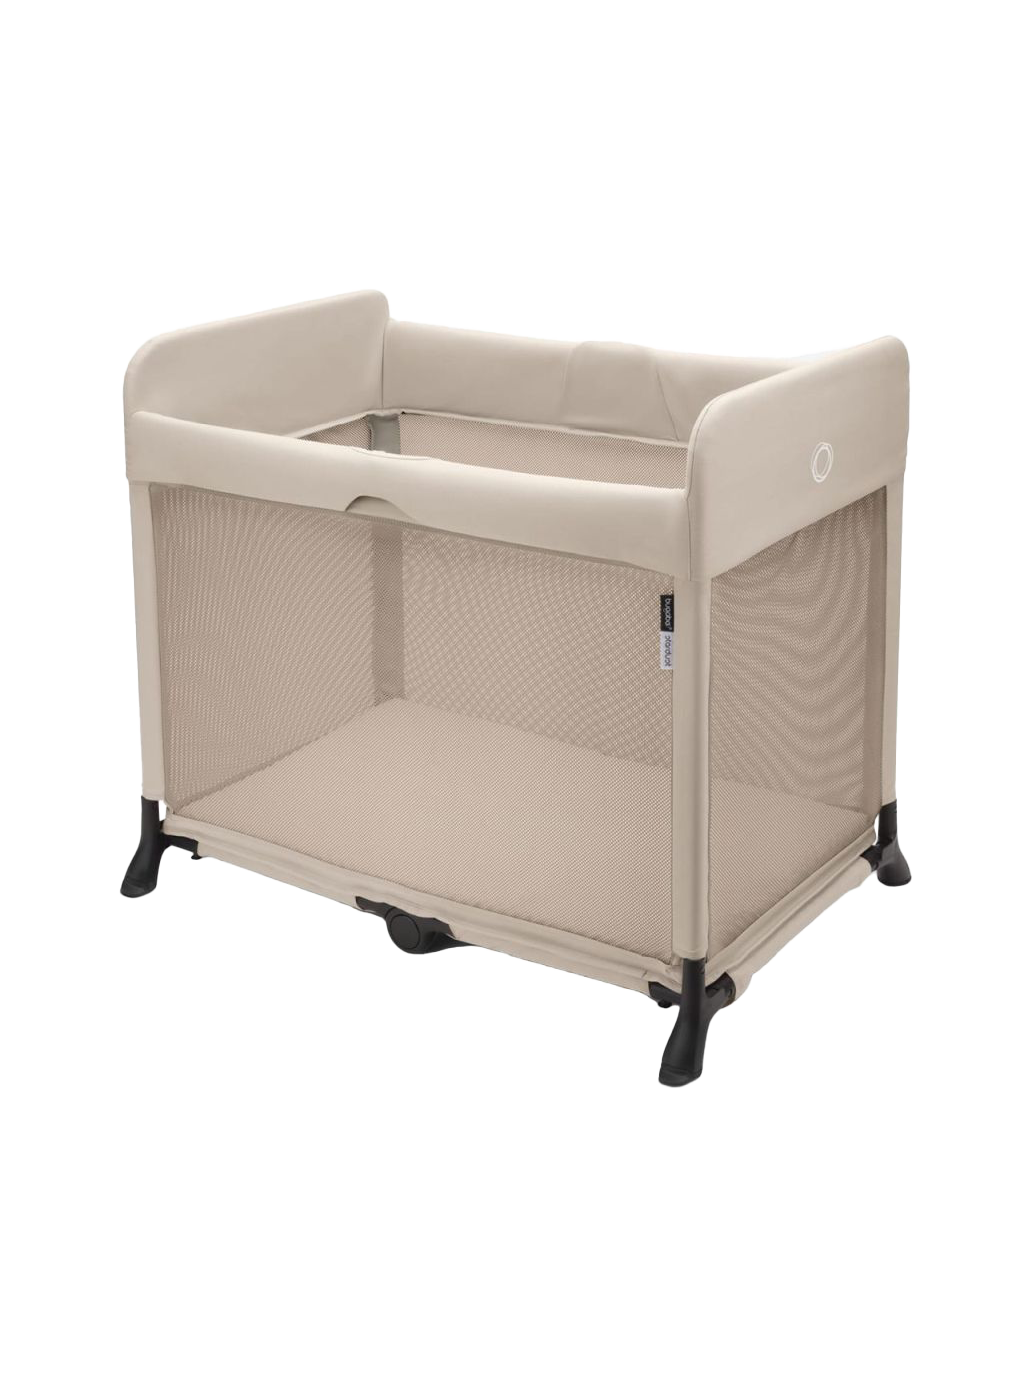 Stardust foldable travel cot